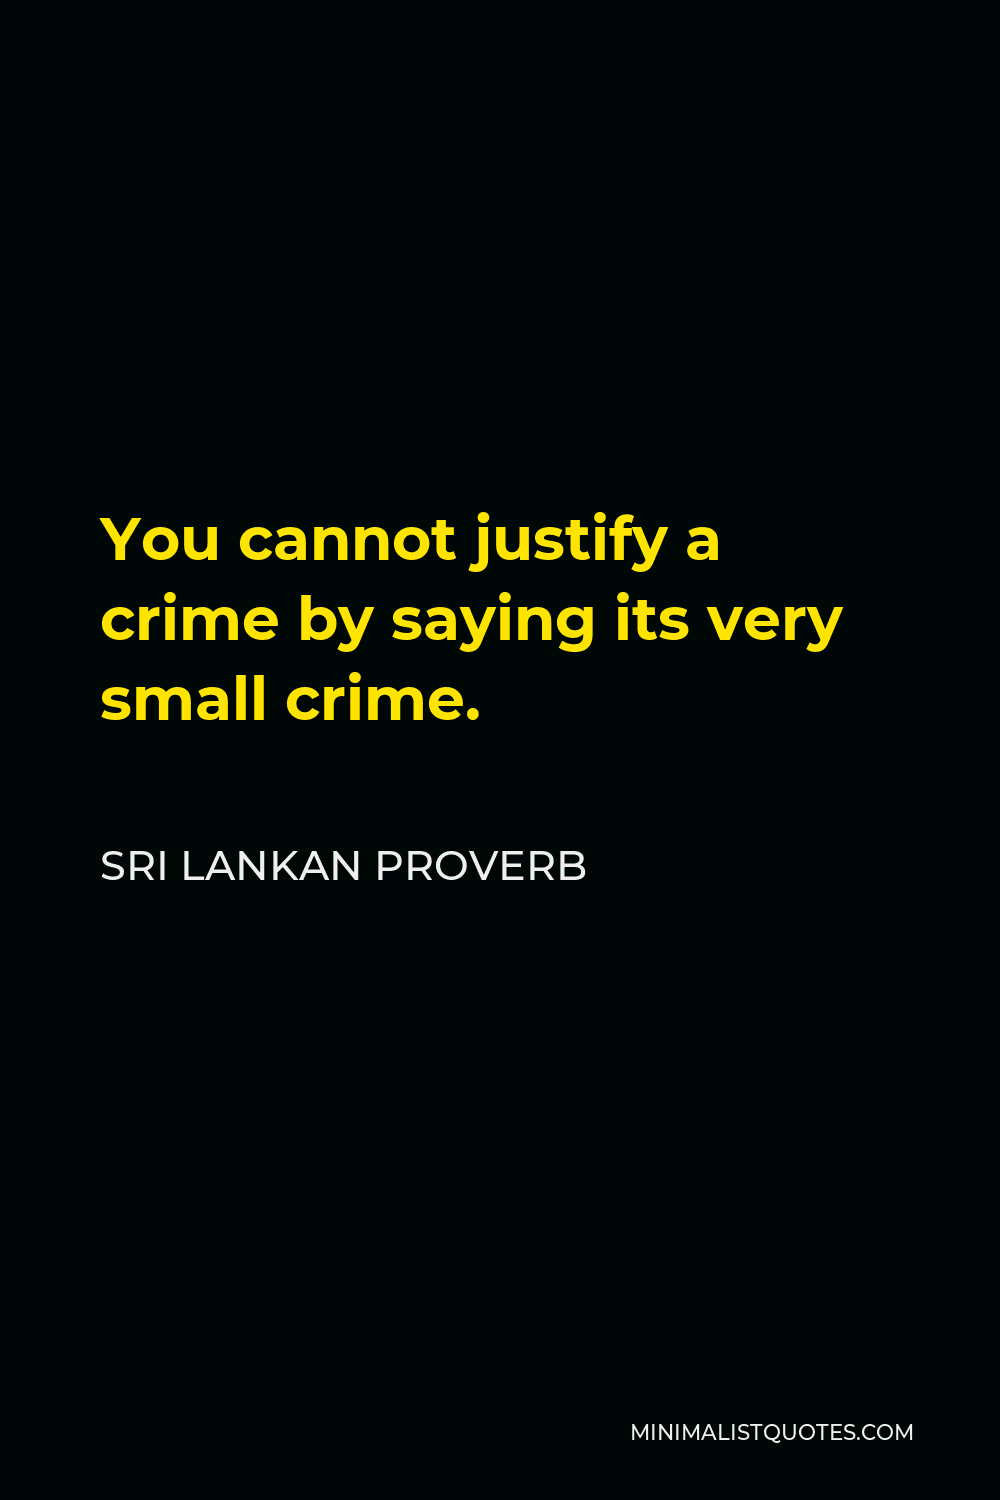 Sri Lankan Proverb Quote - You cannot justify a crime by saying its very small crime.